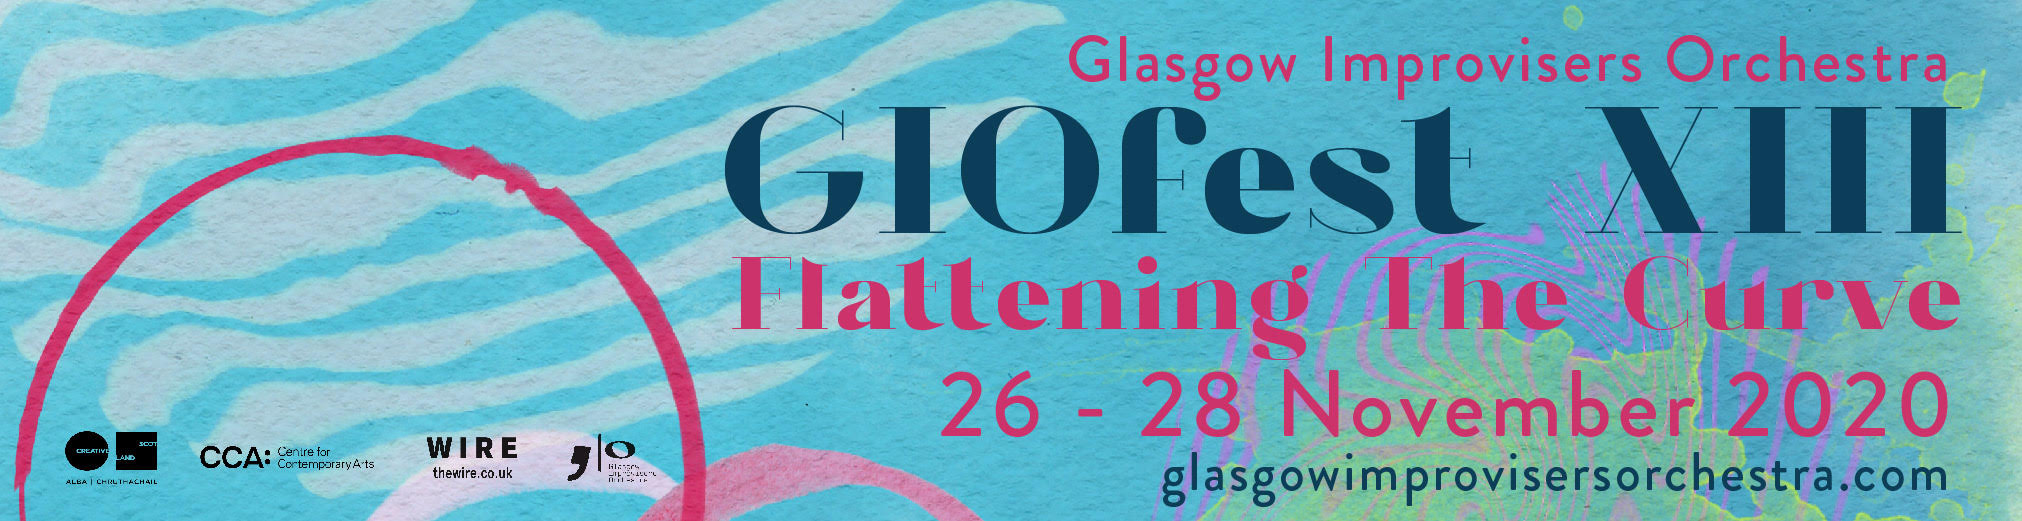 The Glasgow Improvisers Orchestra present GIOfest XIII: 26-28 November 2020. Streamed across the internet for free.